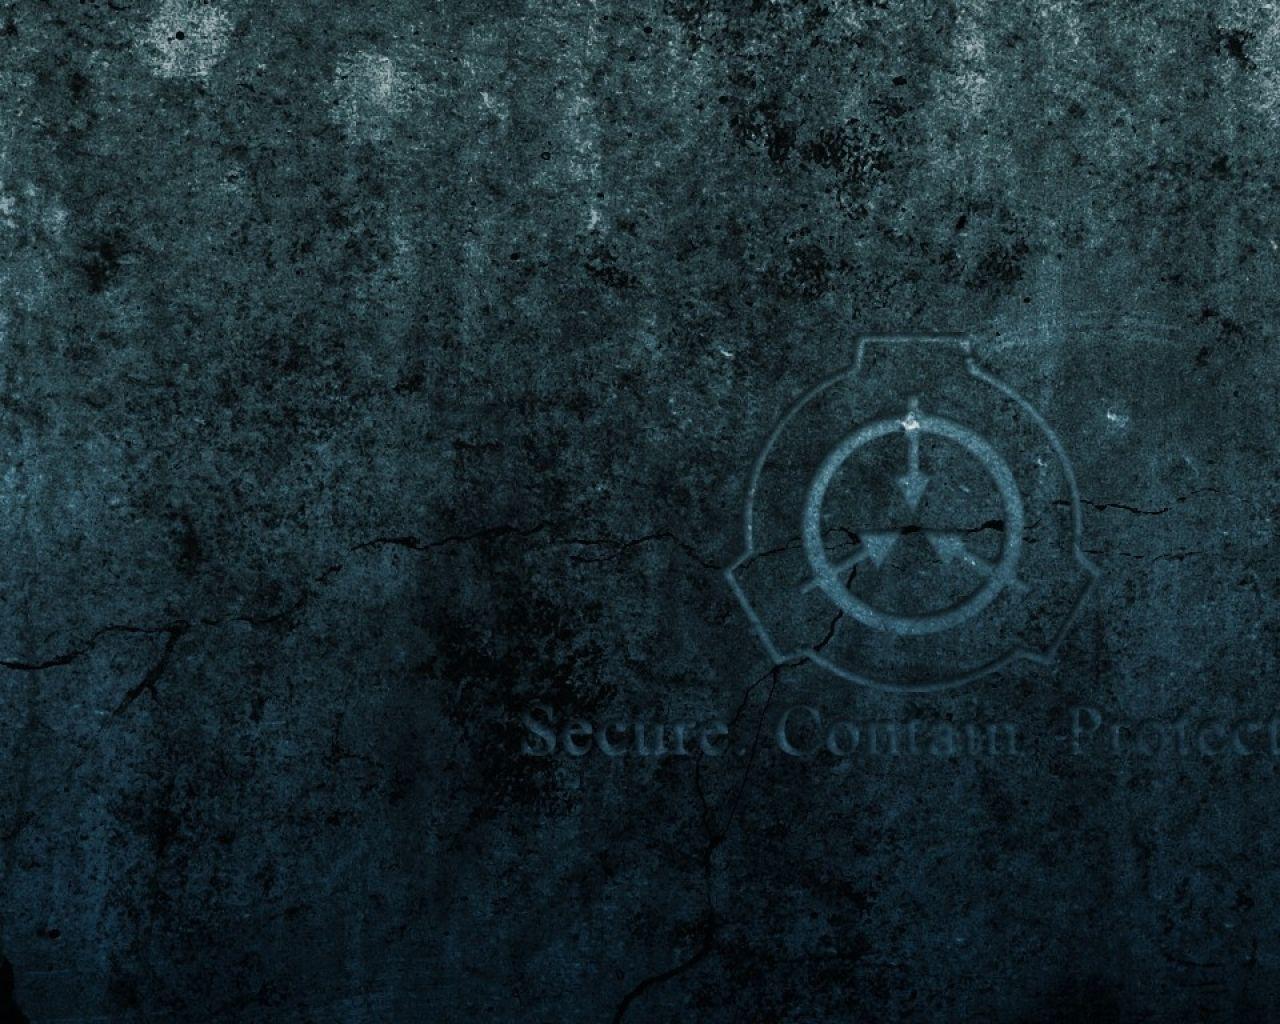 SCP-3812 Wallpapers - Wallpaper Cave